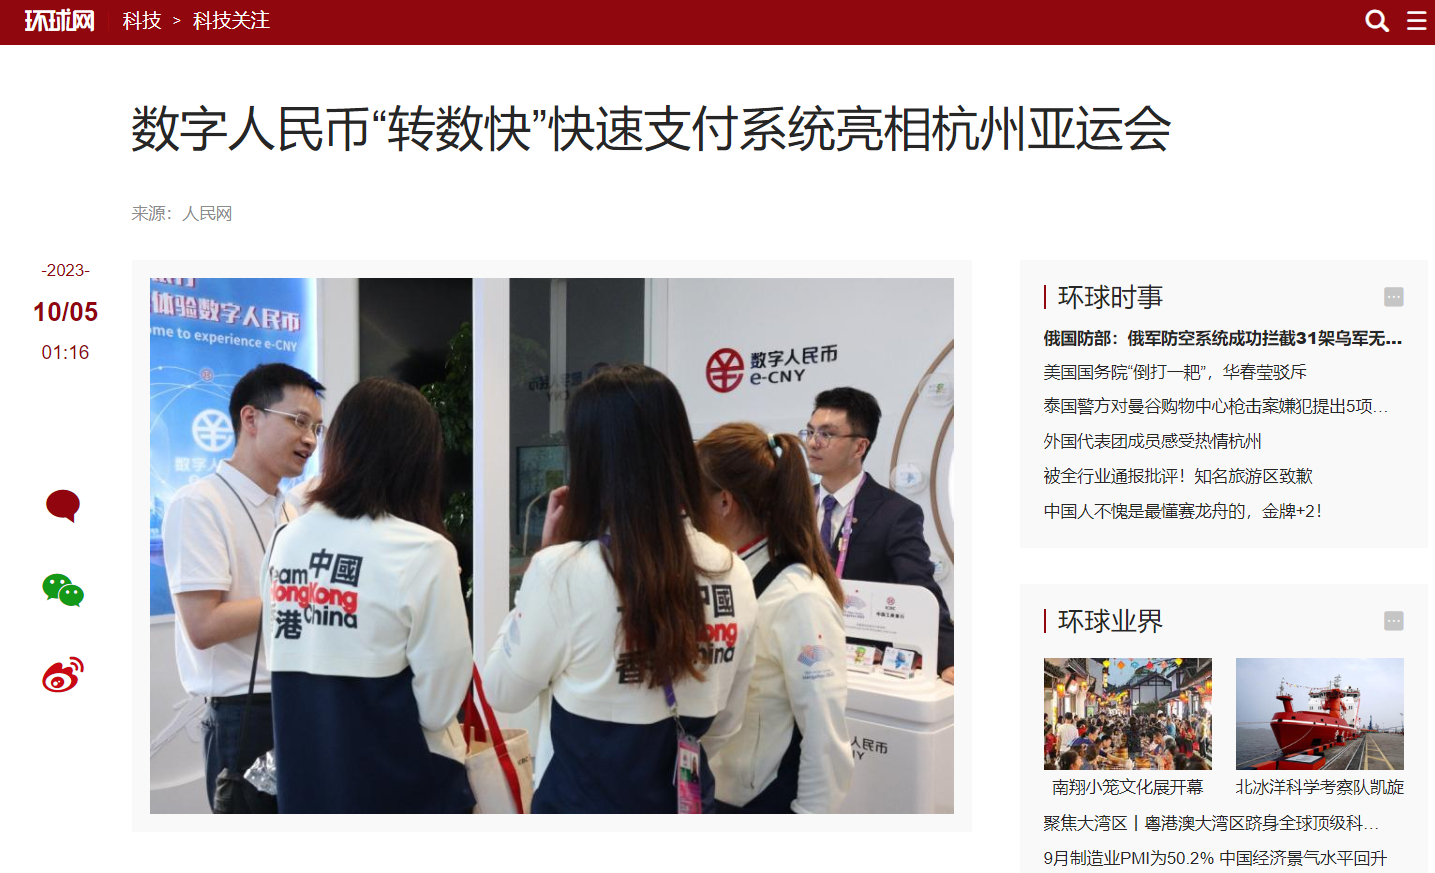 A screenshot of a news report explaining how Hong Kong Asian Games team members can use the FPS payment platform to top up digital yuan wallets.